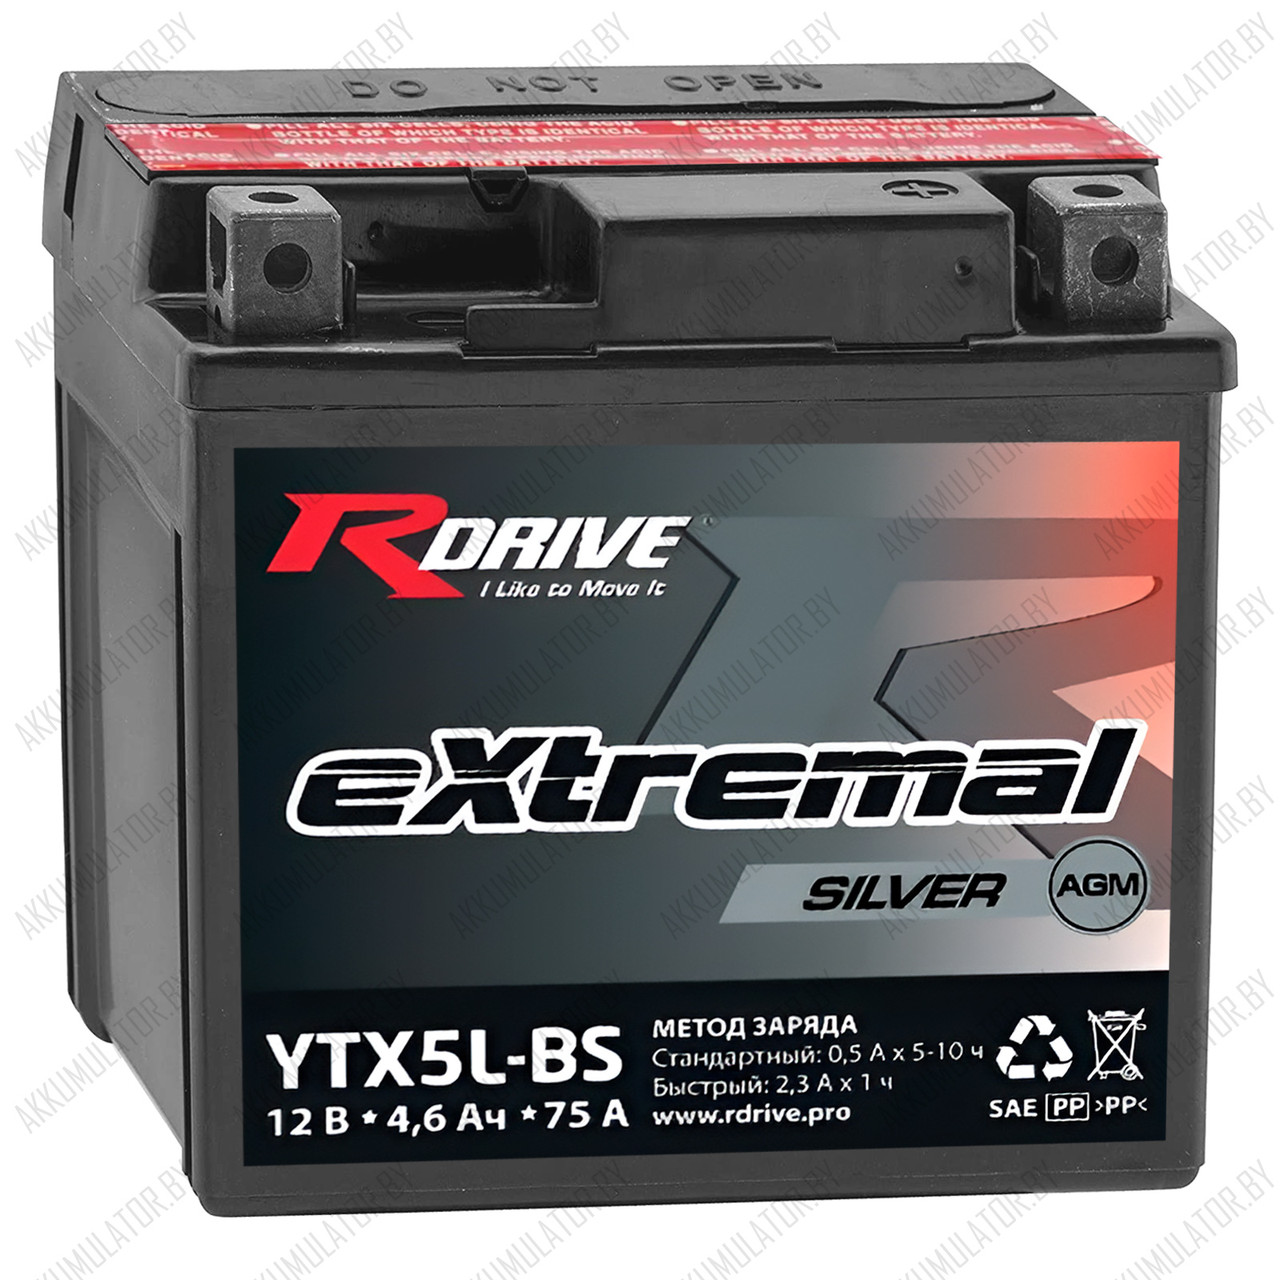 RDrive eXtremal Silver YTX5L-BS / 4,6Ah